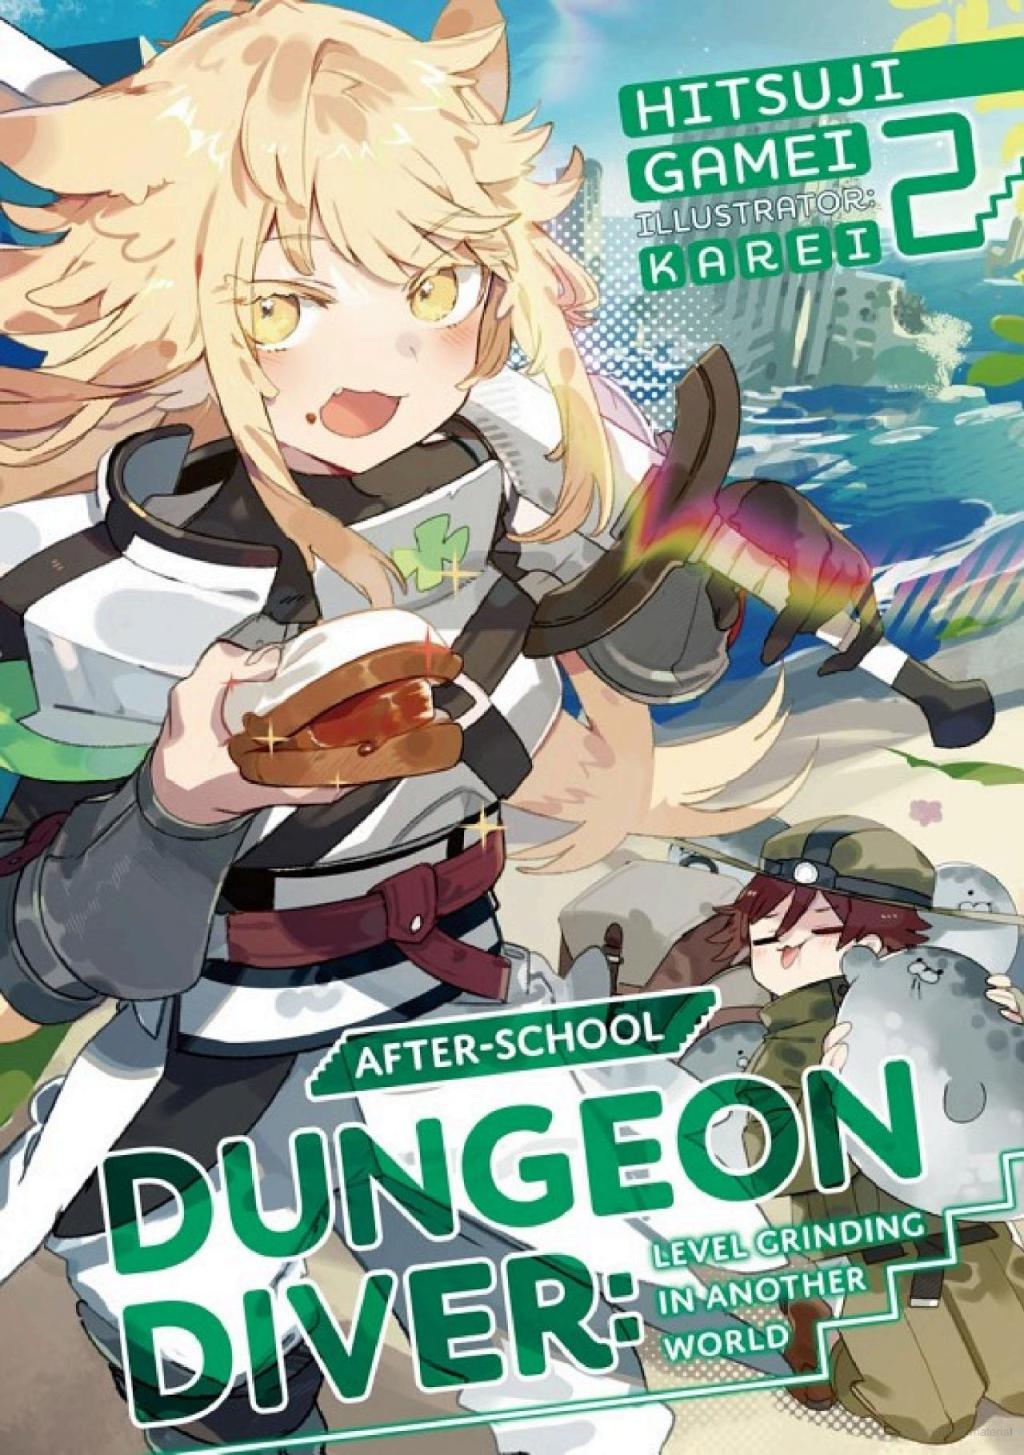 After-School Dungeon Diver: Level Grinding in Another World Vol. 2 Review